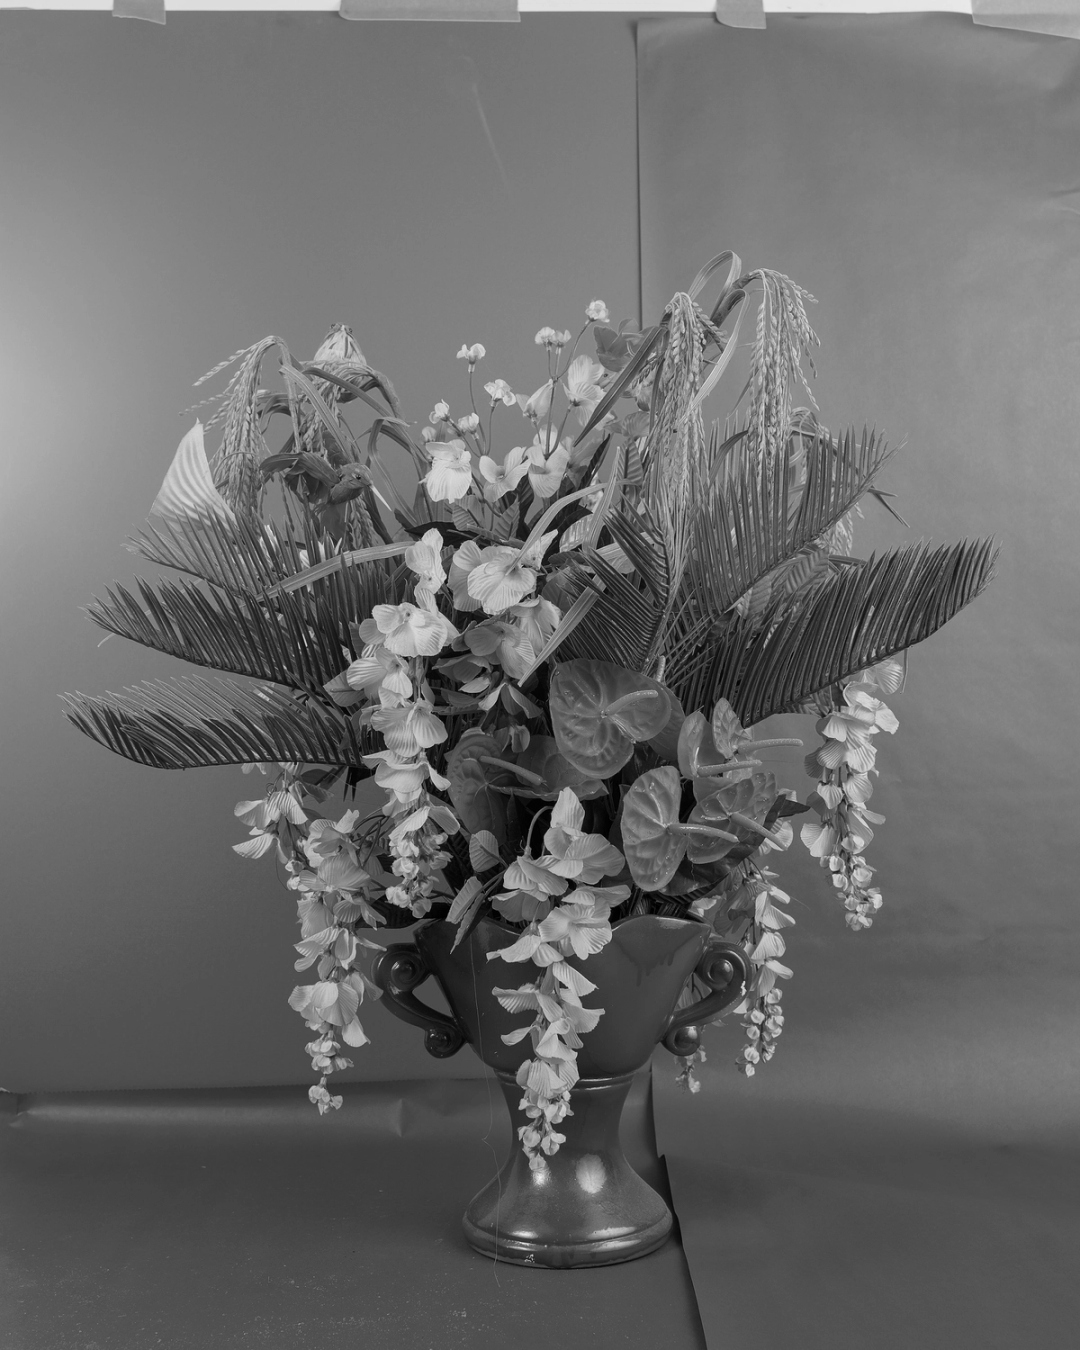 A black-and-white photo of a bouquet of artificial flowers, including bent wheat stalks cascading orchids, and anthurium lilies.